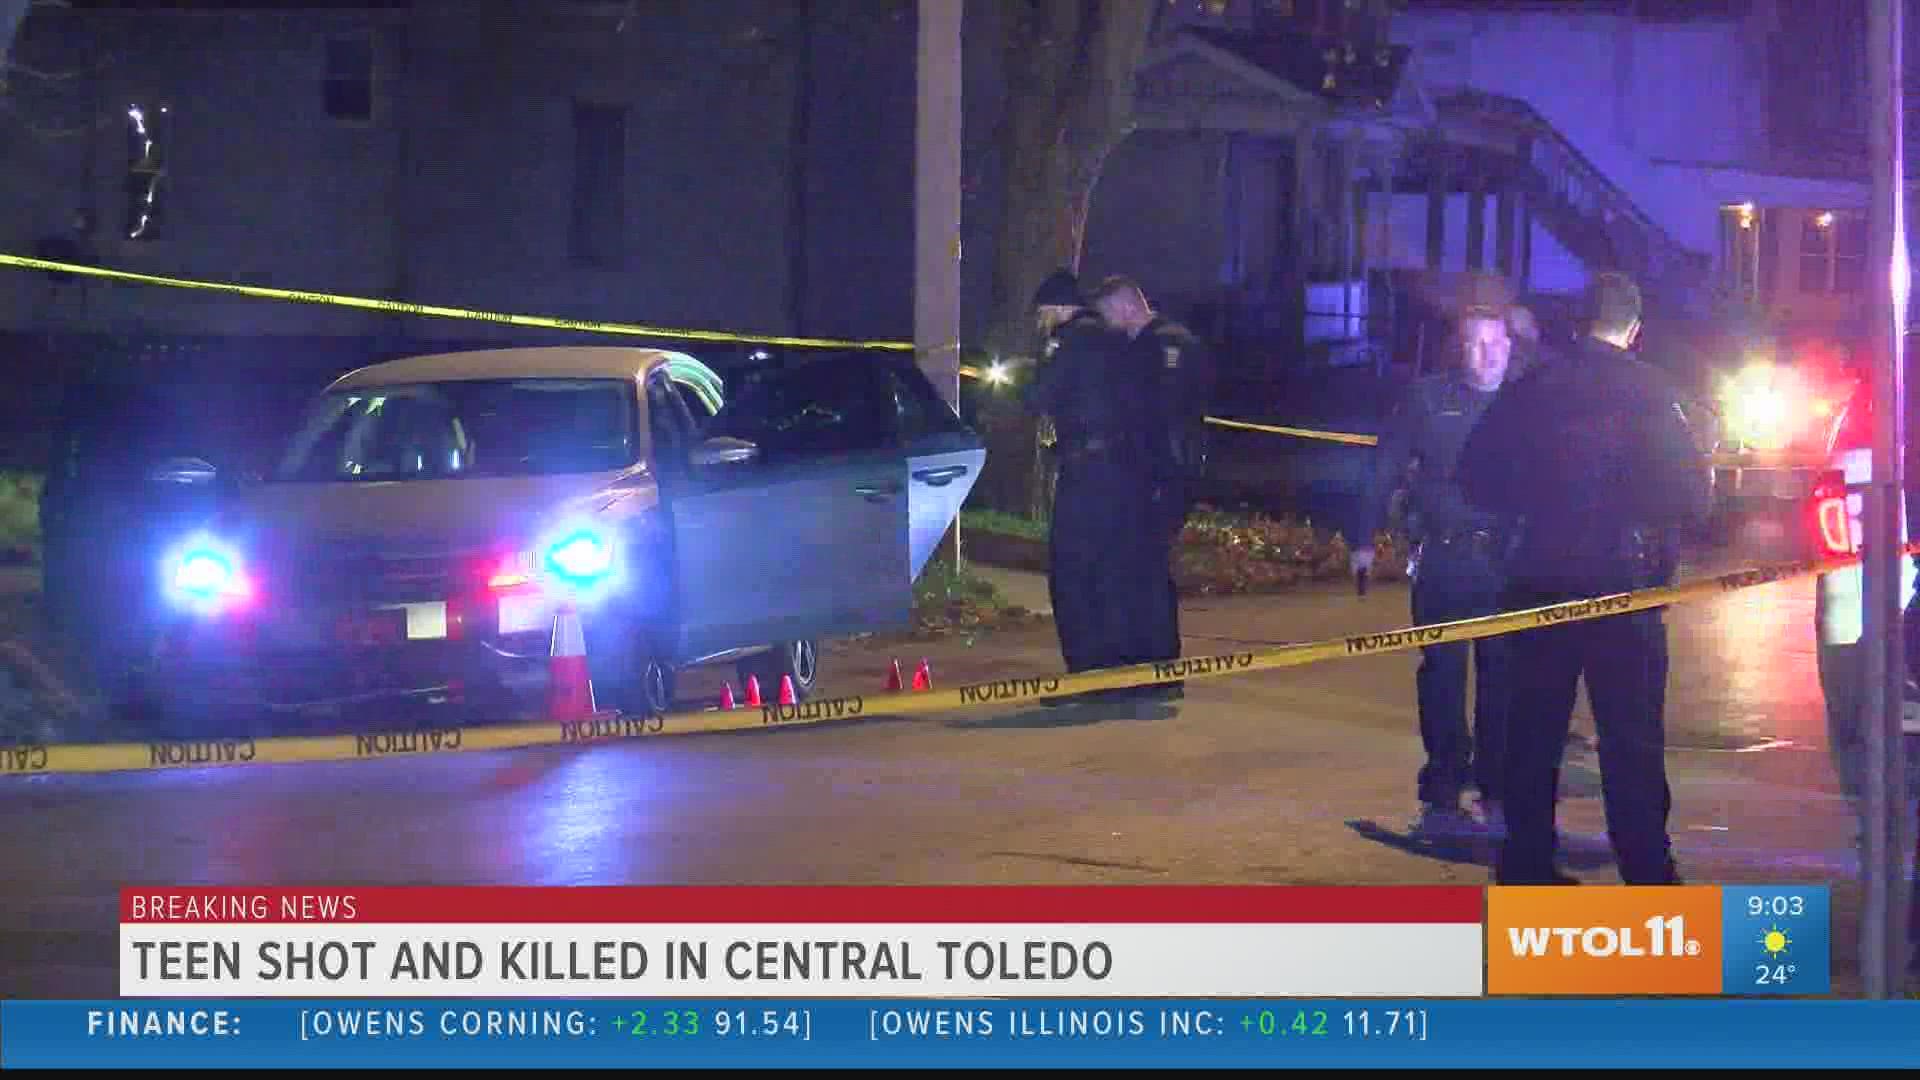 A 14-year-old boy was shot and killed while sitting in a vehicle outside a townhouse in south Toledo. The second, separate shooting targeted a townhouse.